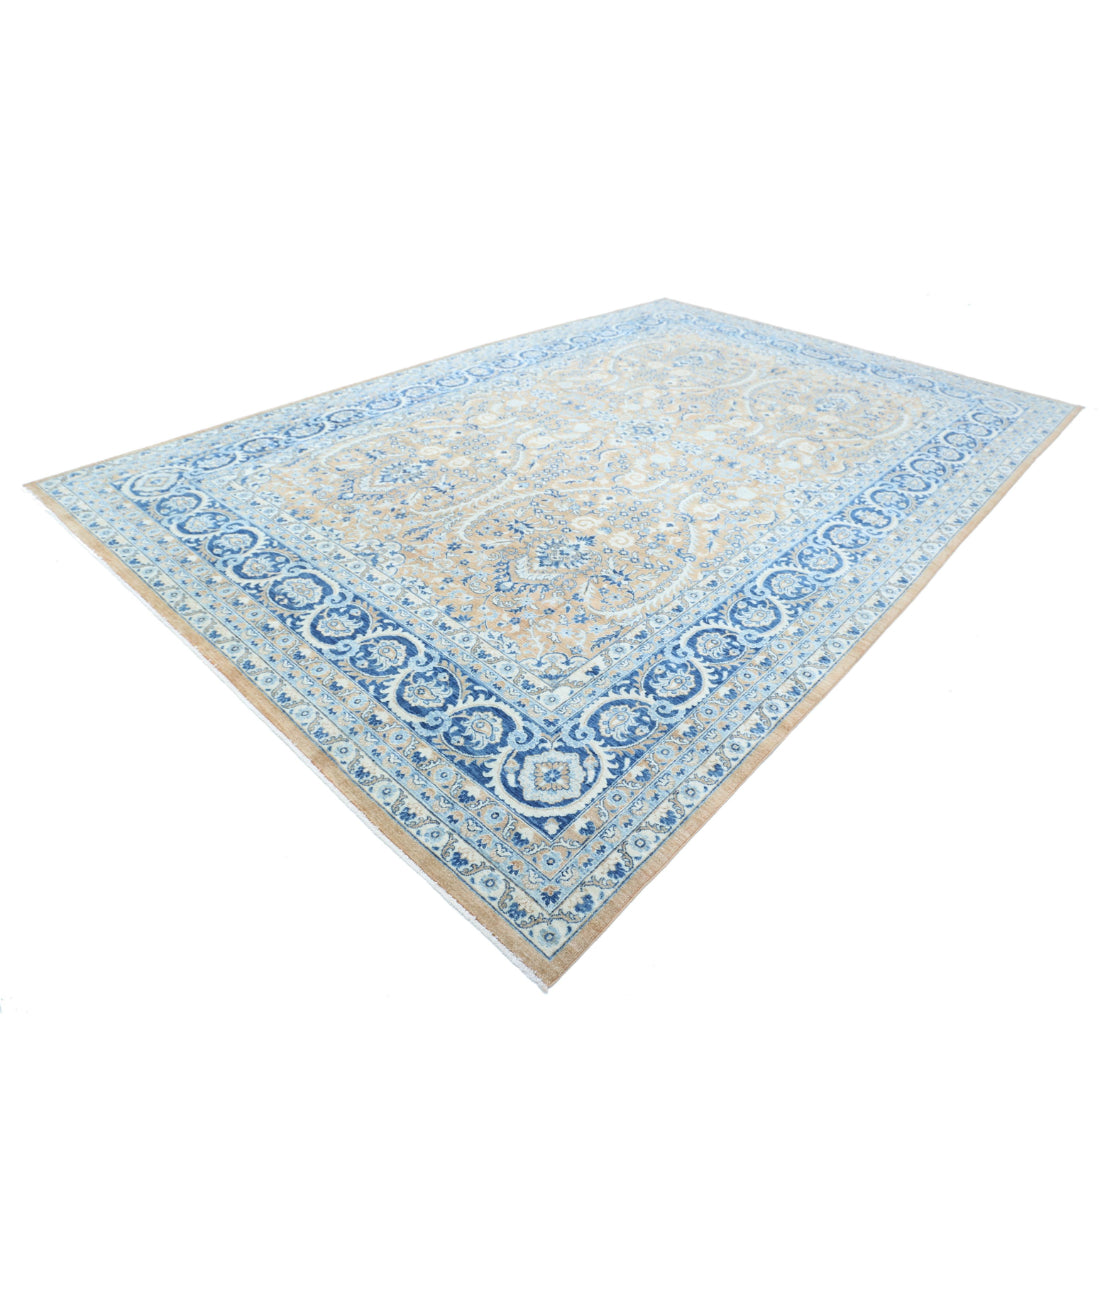 Ziegler 9'6'' X 14'2'' Hand-Knotted Wool Rug 9'6'' x 14'2'' (285 X 425) / Taupe / Blue